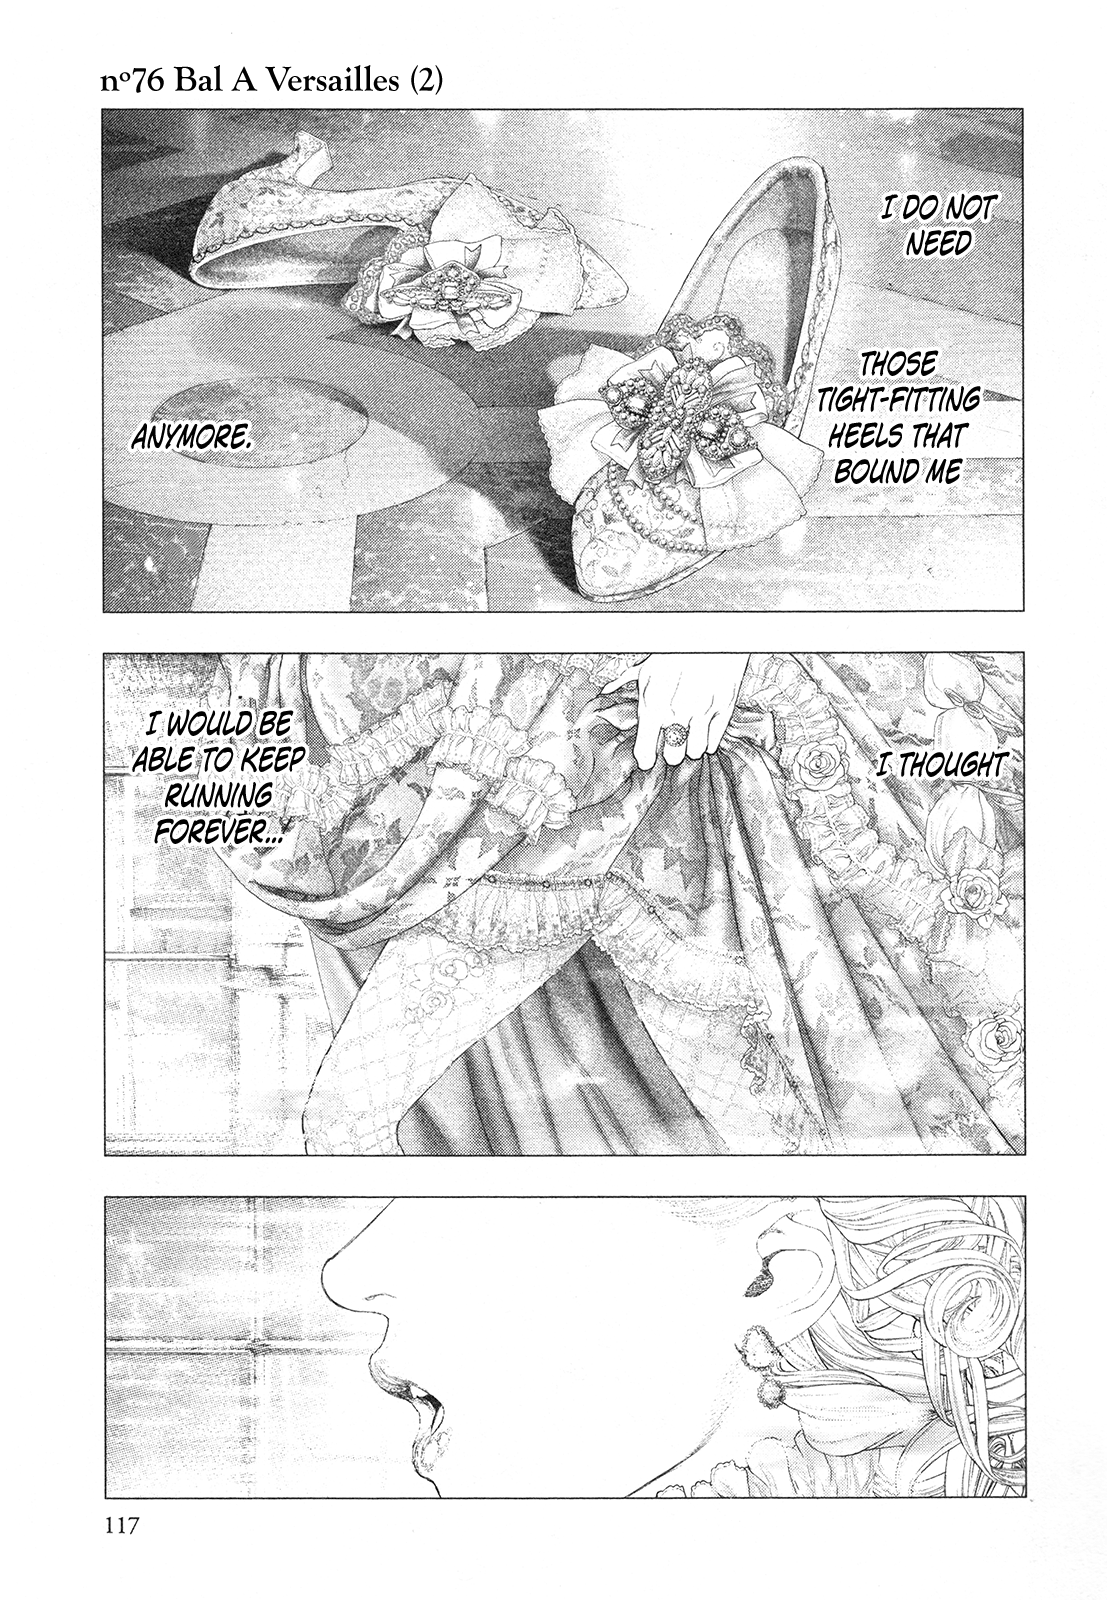 Innocent Rouge Vol.11-Chapter.76-Bal-A-Versailles-(2) Image